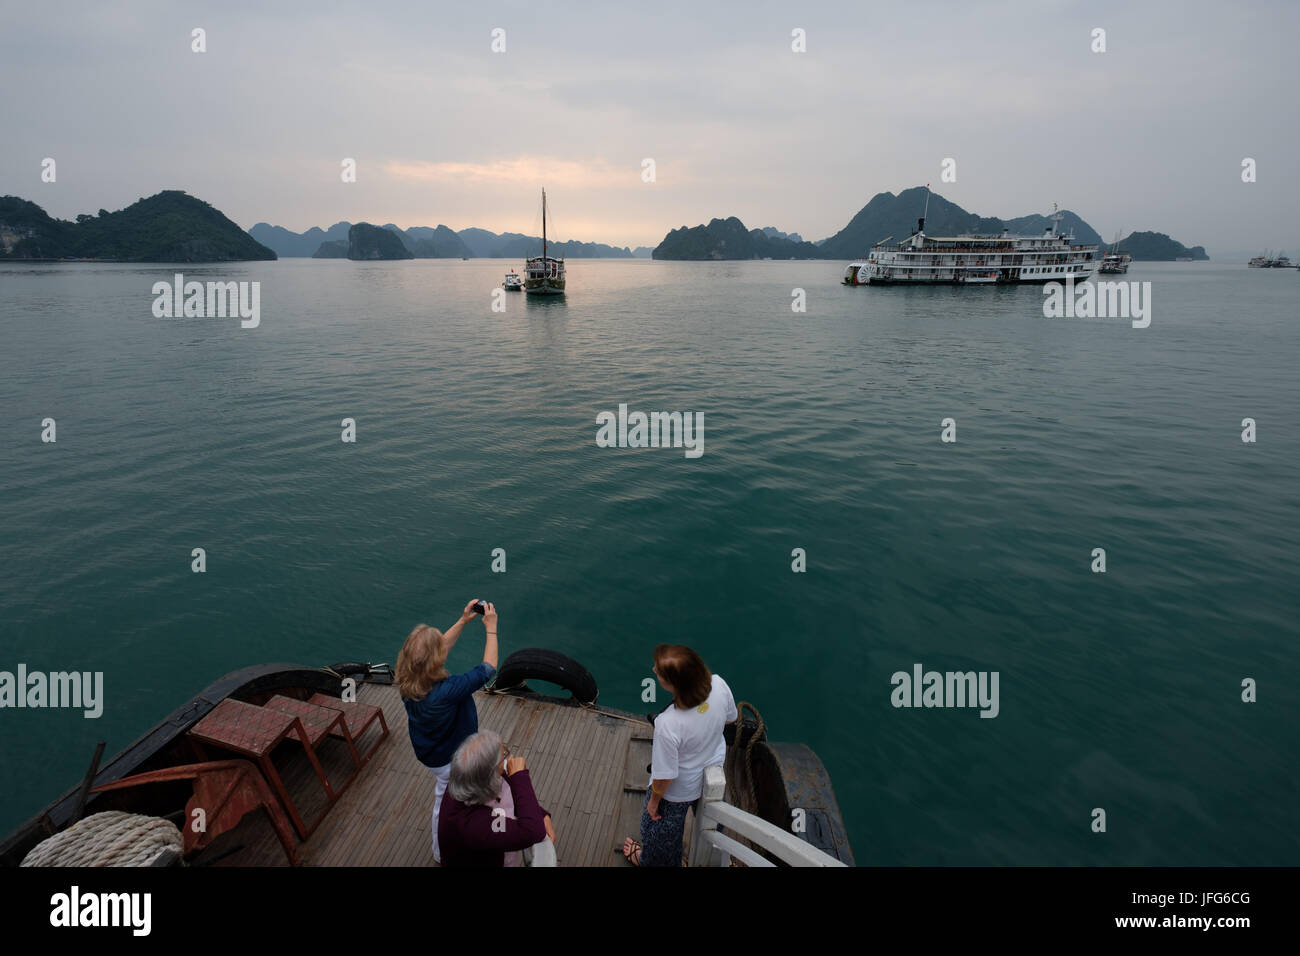 Tourists taking picture on the deck of a cruise tour boat on Halong Bay, Vietnam, Asia Stock Photo